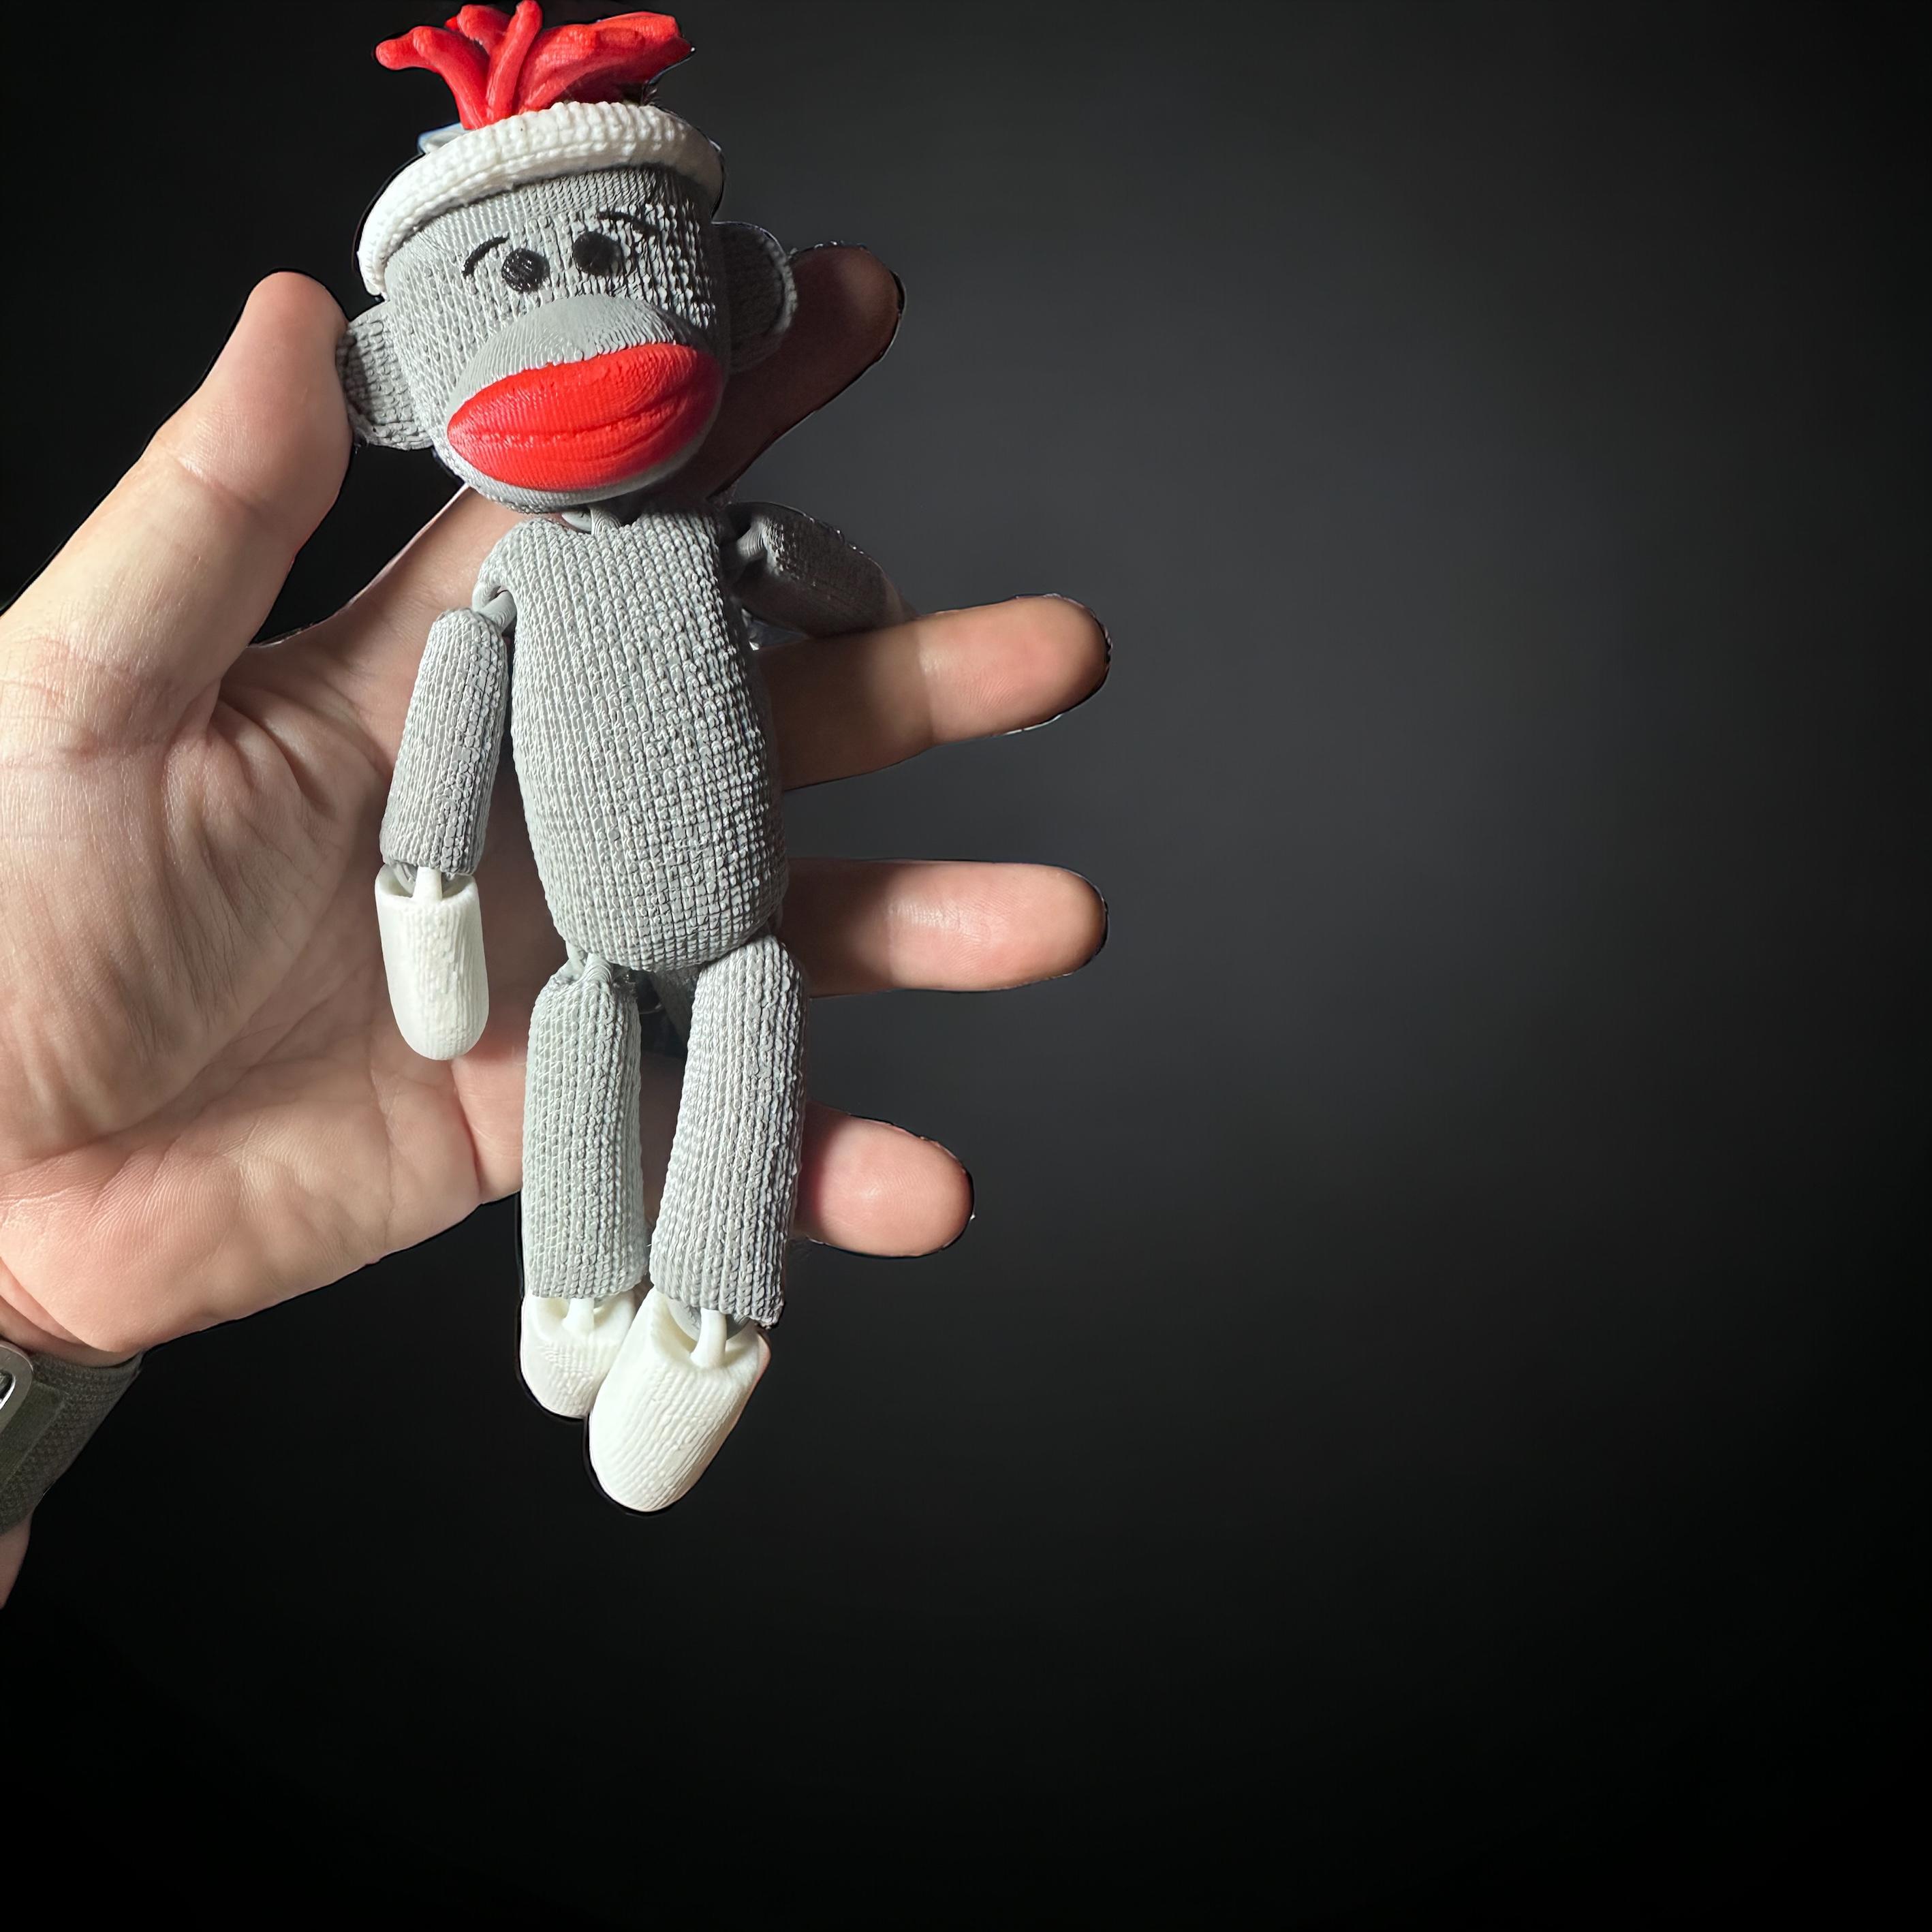 SOCK MONKEY - Articulating, Print in Place, pre painted 3d model